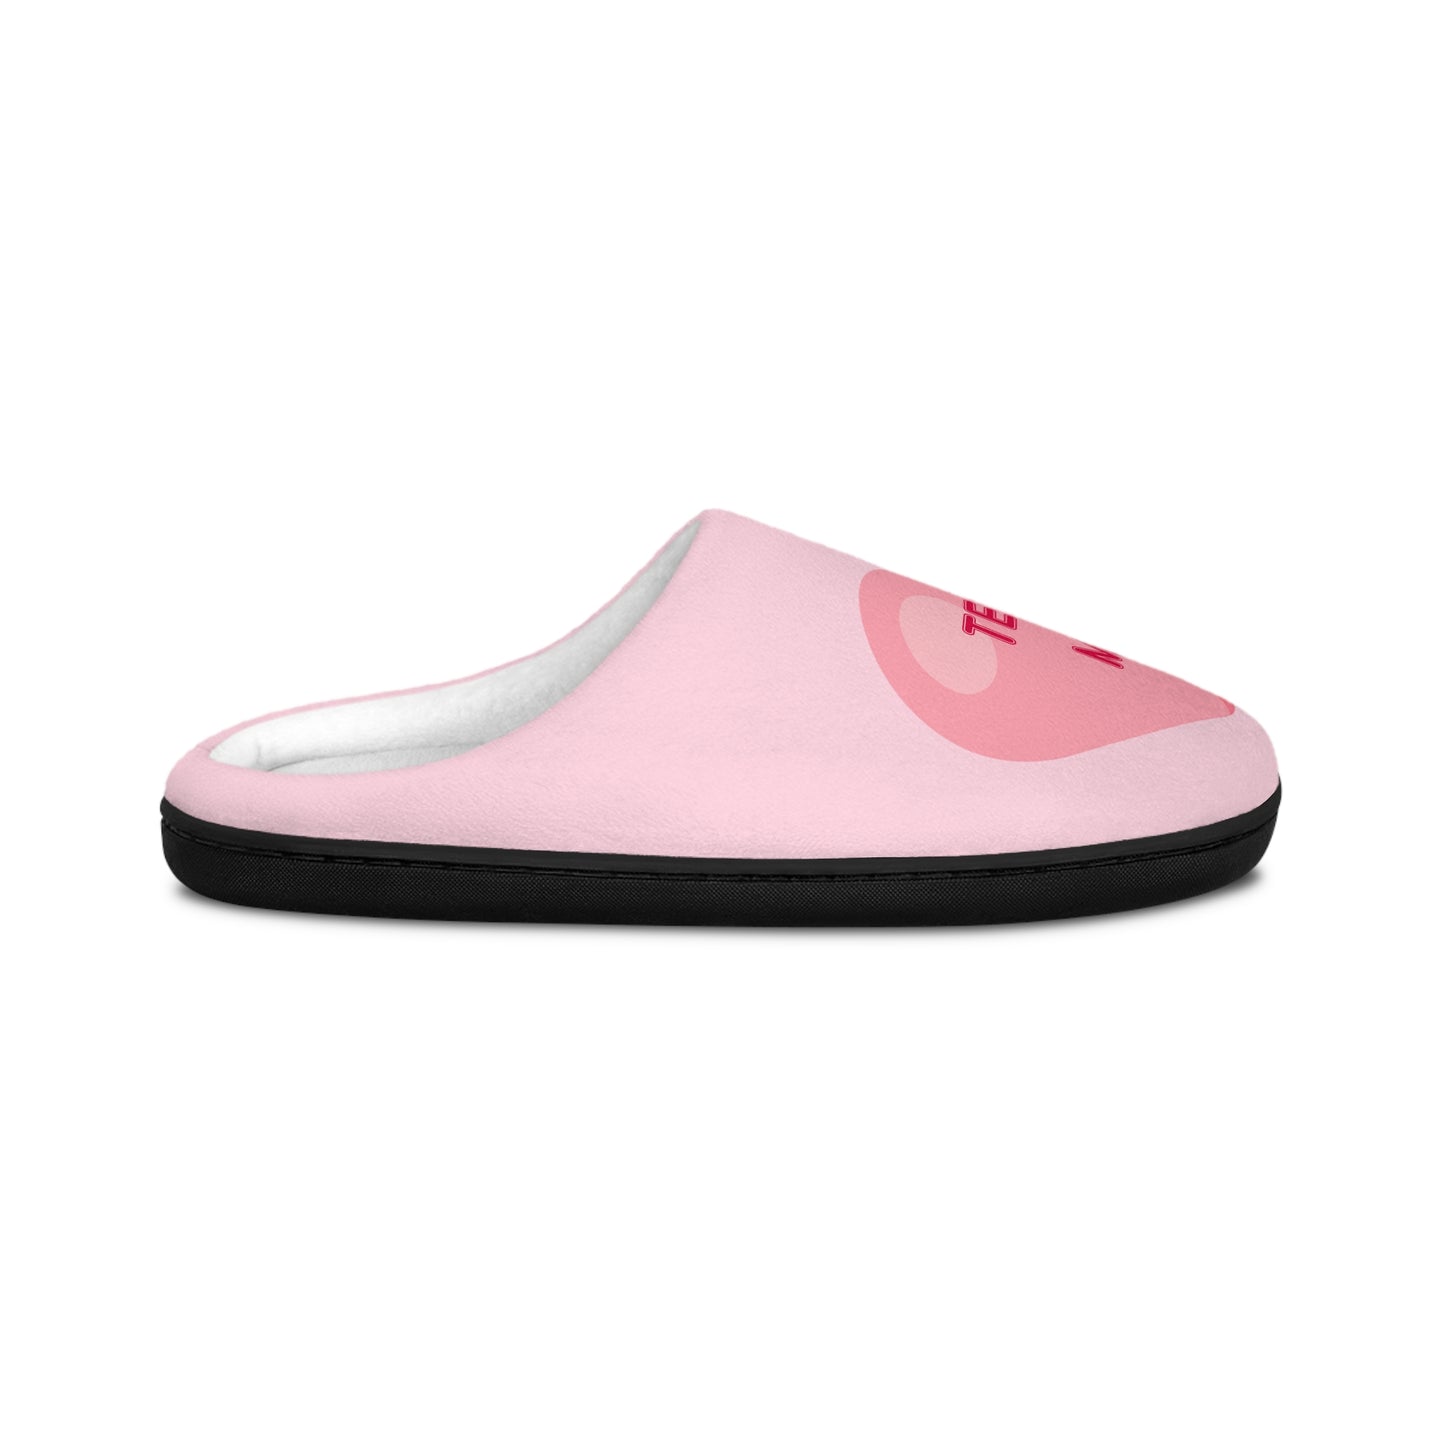 Text Me - Women's Slippers